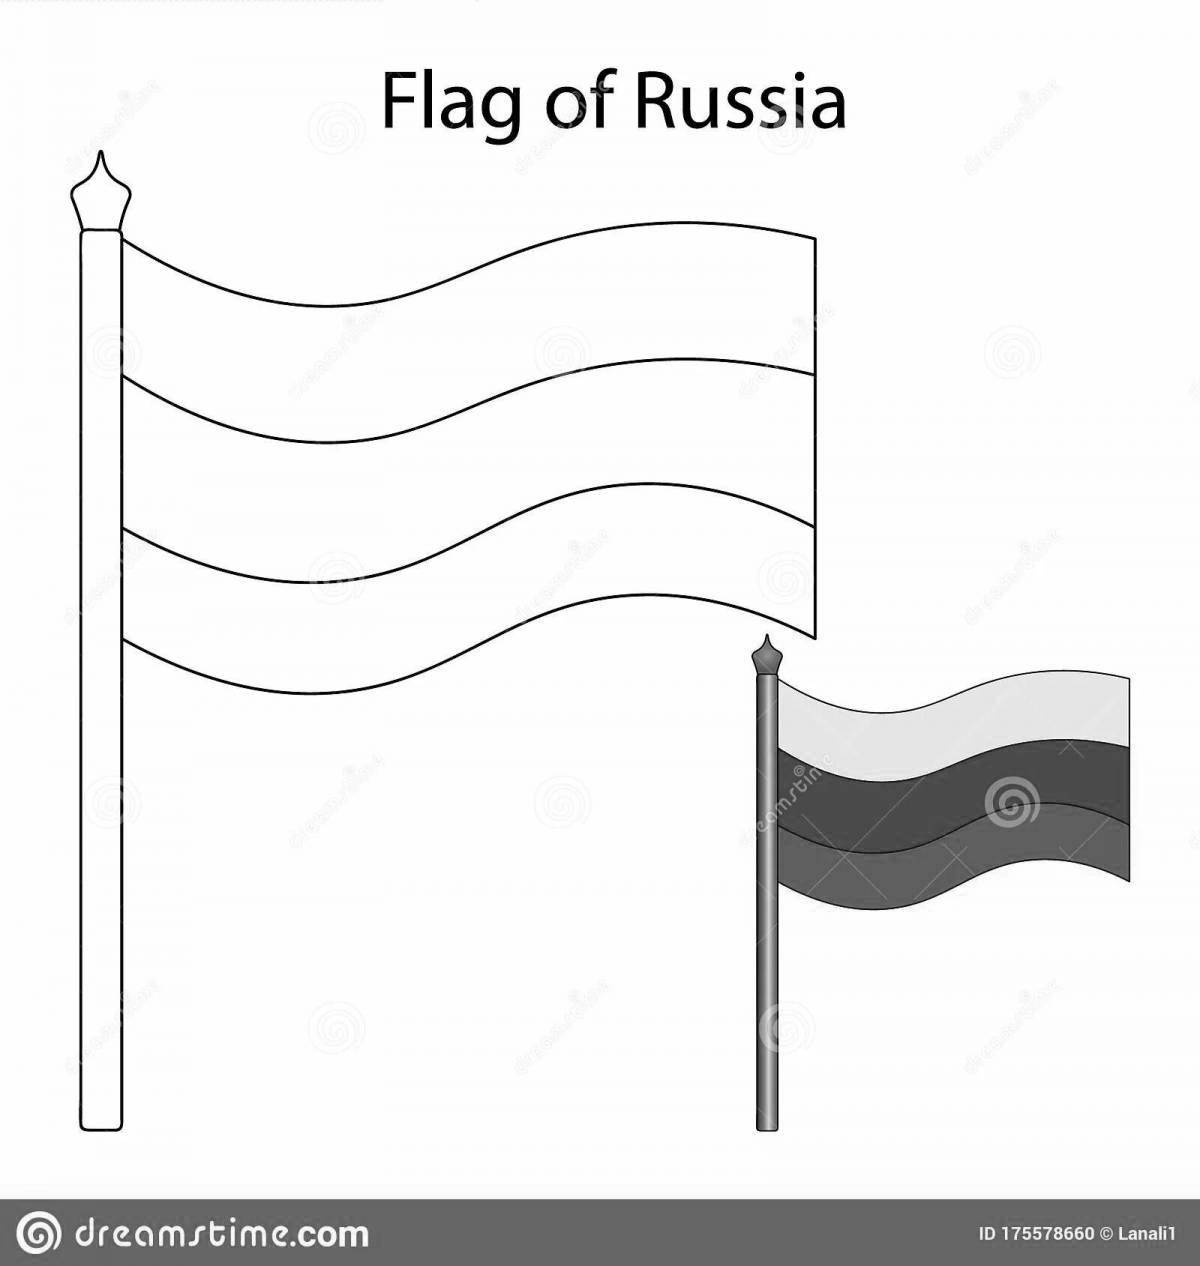 Coloring page dazzling tricolor flag